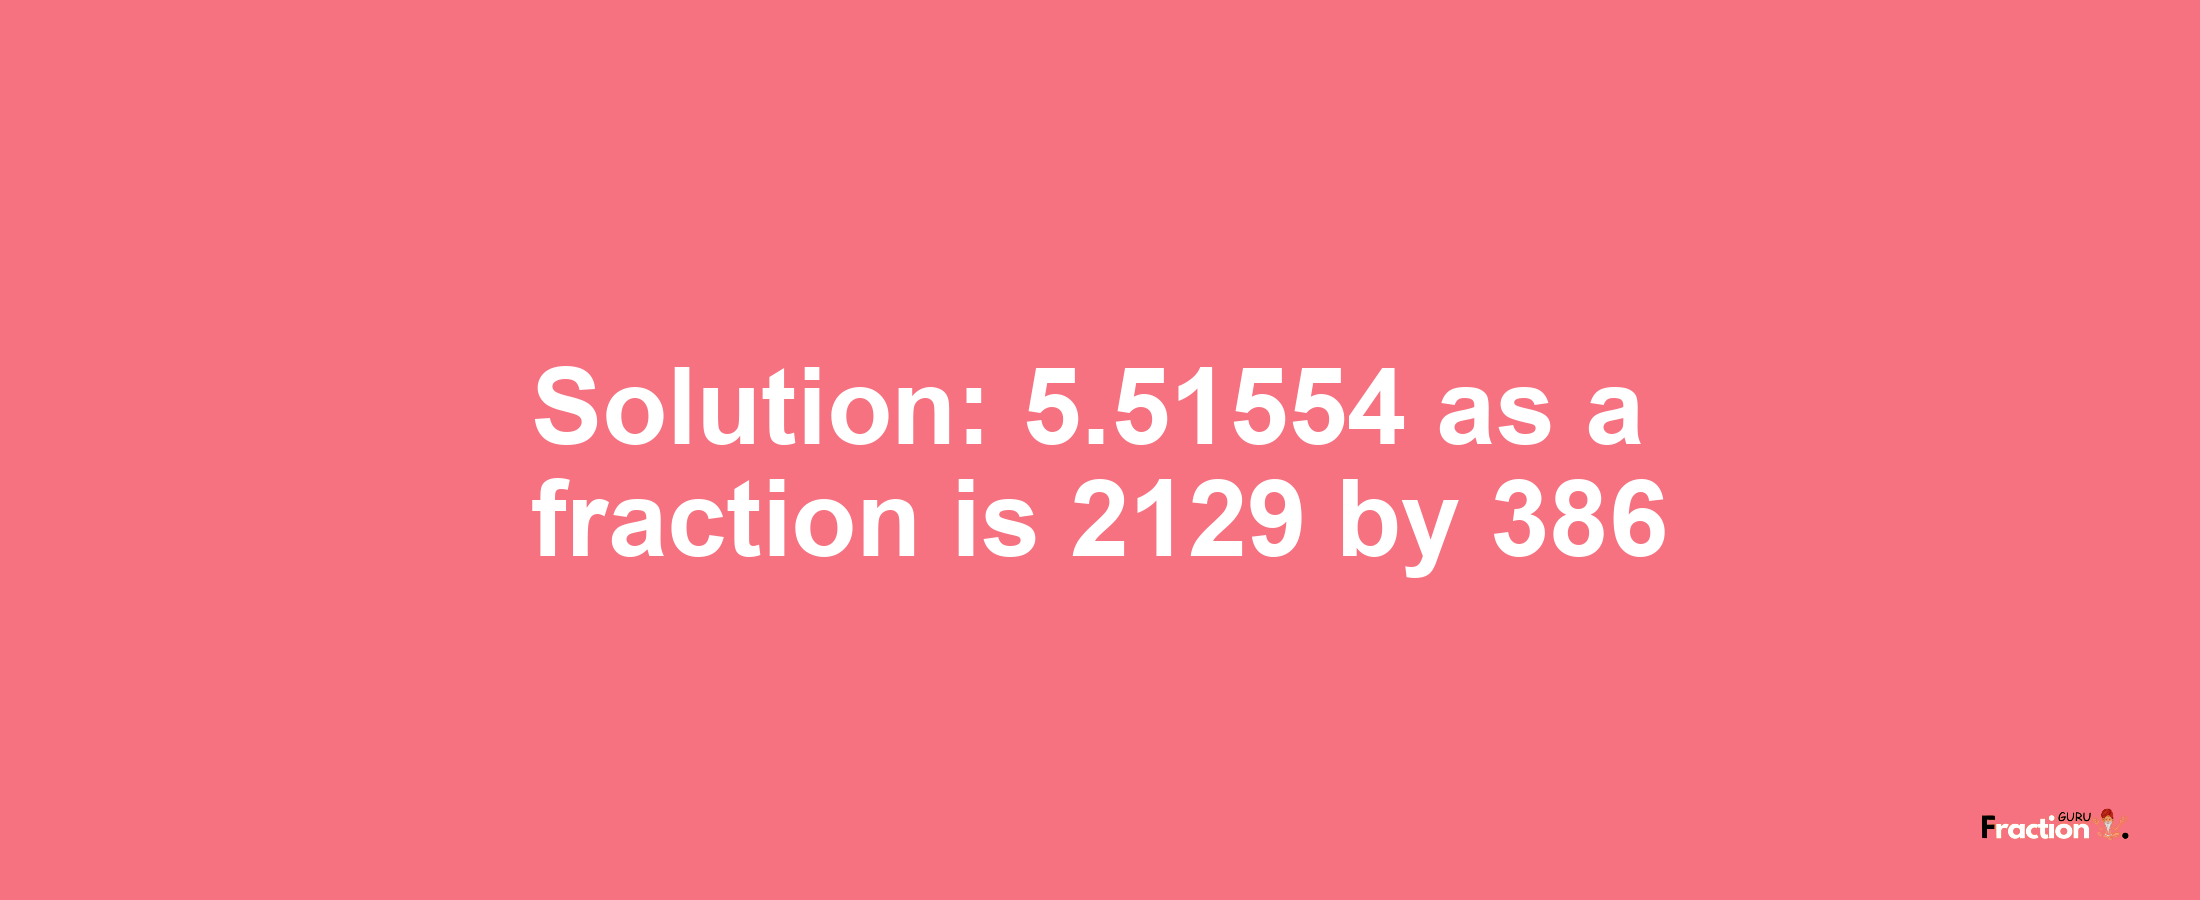 Solution:5.51554 as a fraction is 2129/386